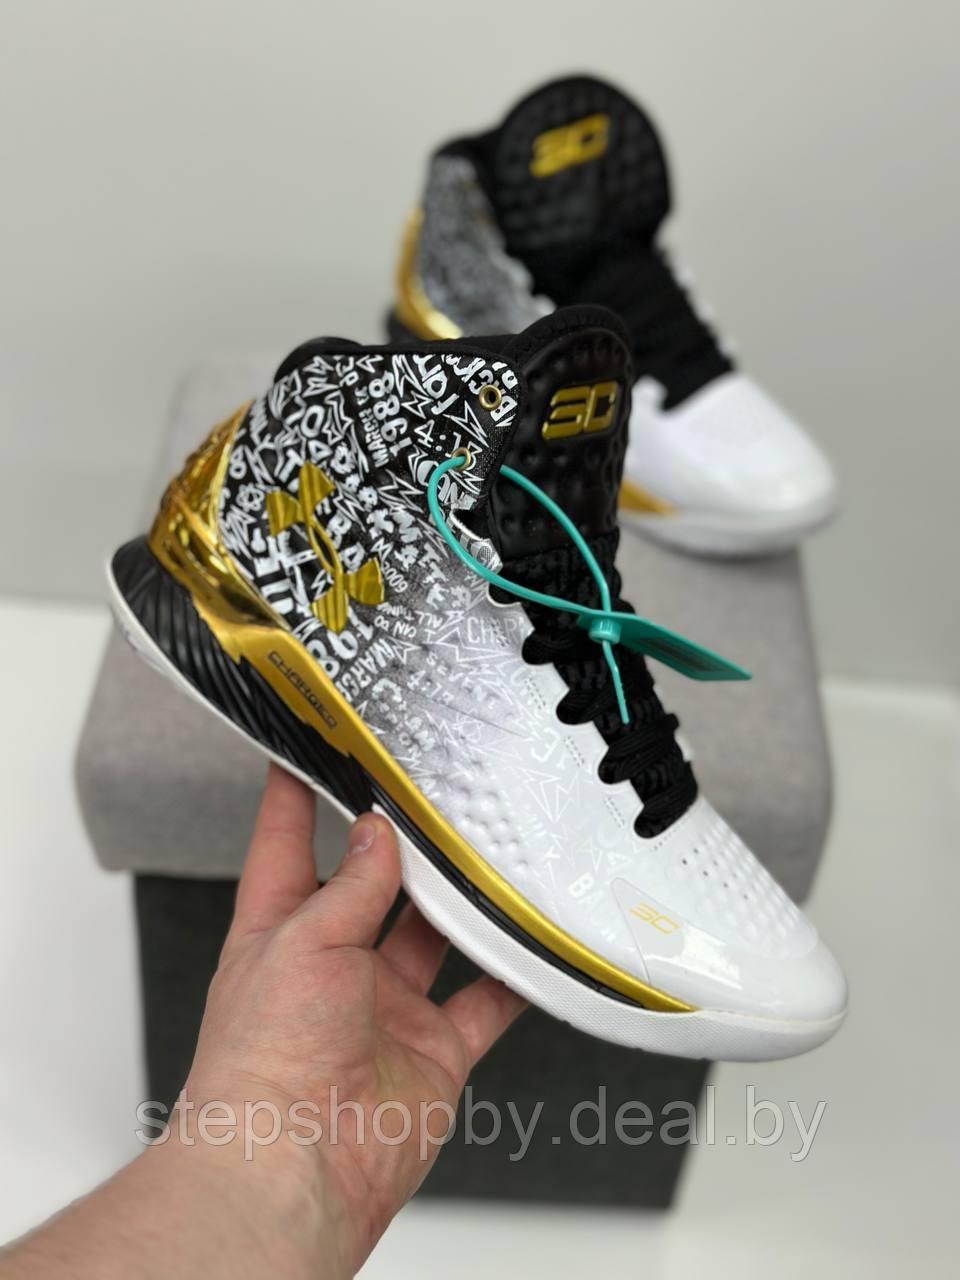 КРОССОВКИ UNDER ARMOUR UNDER ARMOUR CURRY 1 RETRO BACK TO BACK MVP 2021 41 - фото 1 - id-p225960504